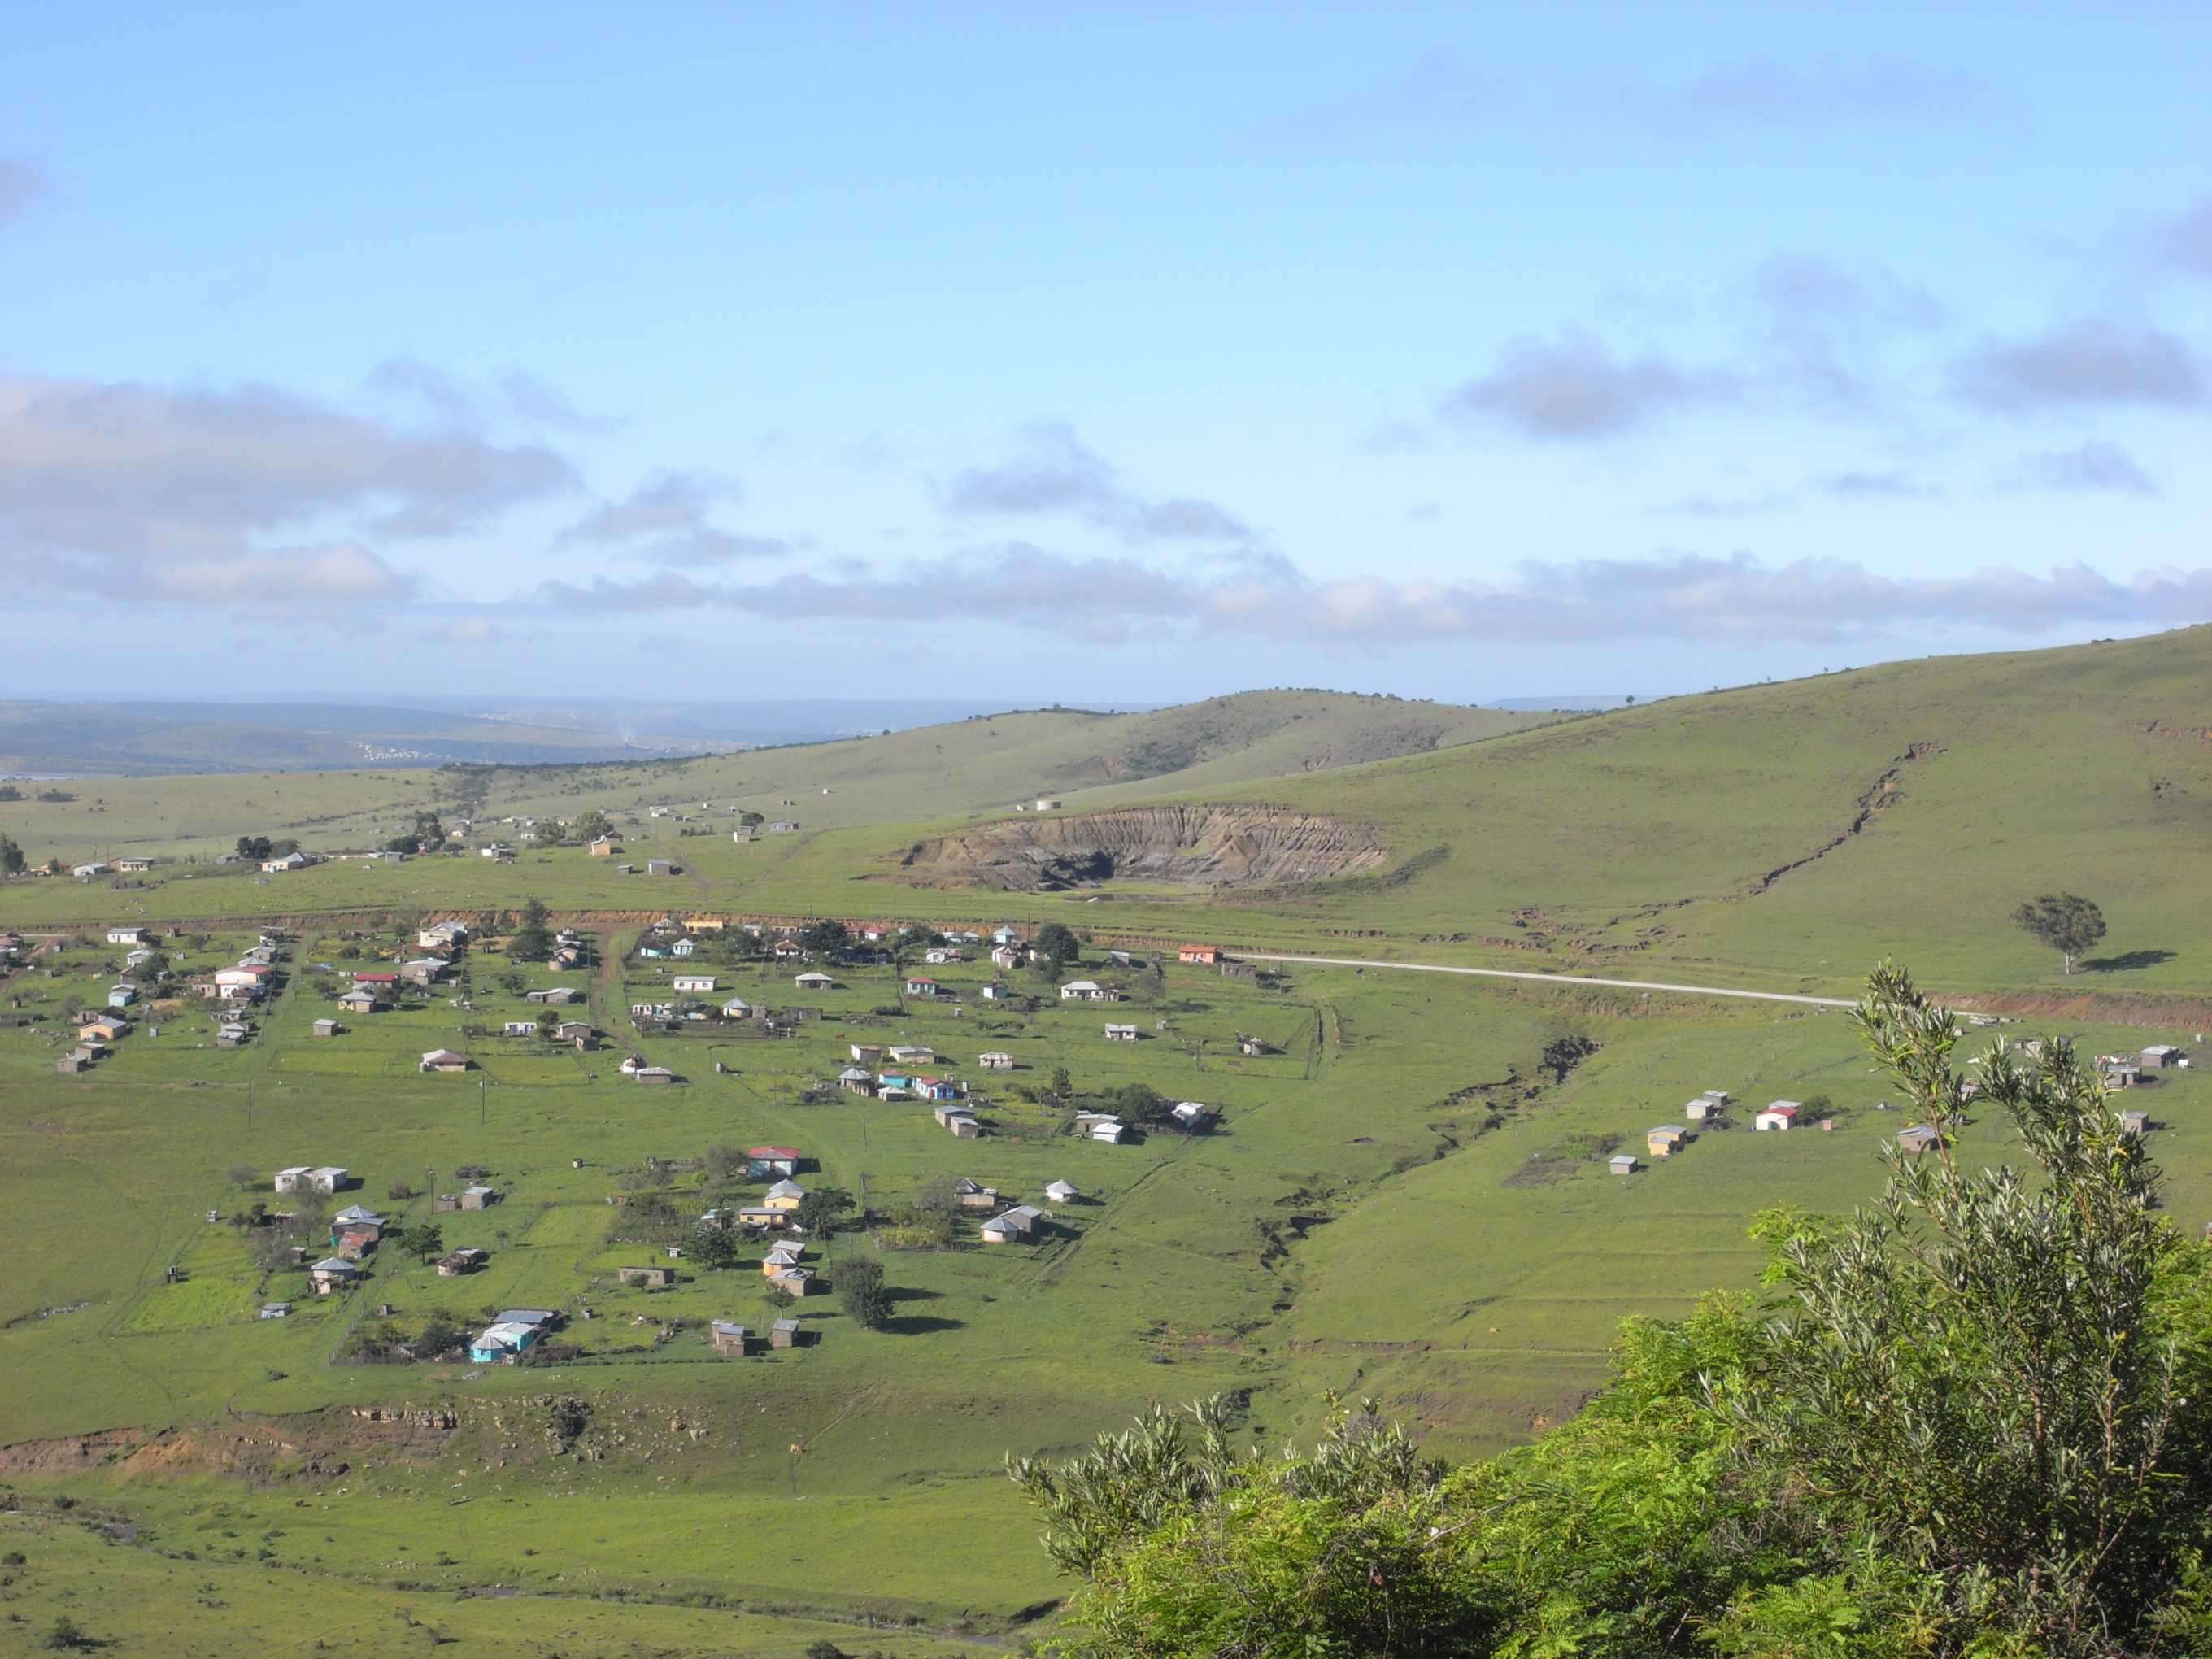 Xhosa homesteads and the Eastern Cape landscape